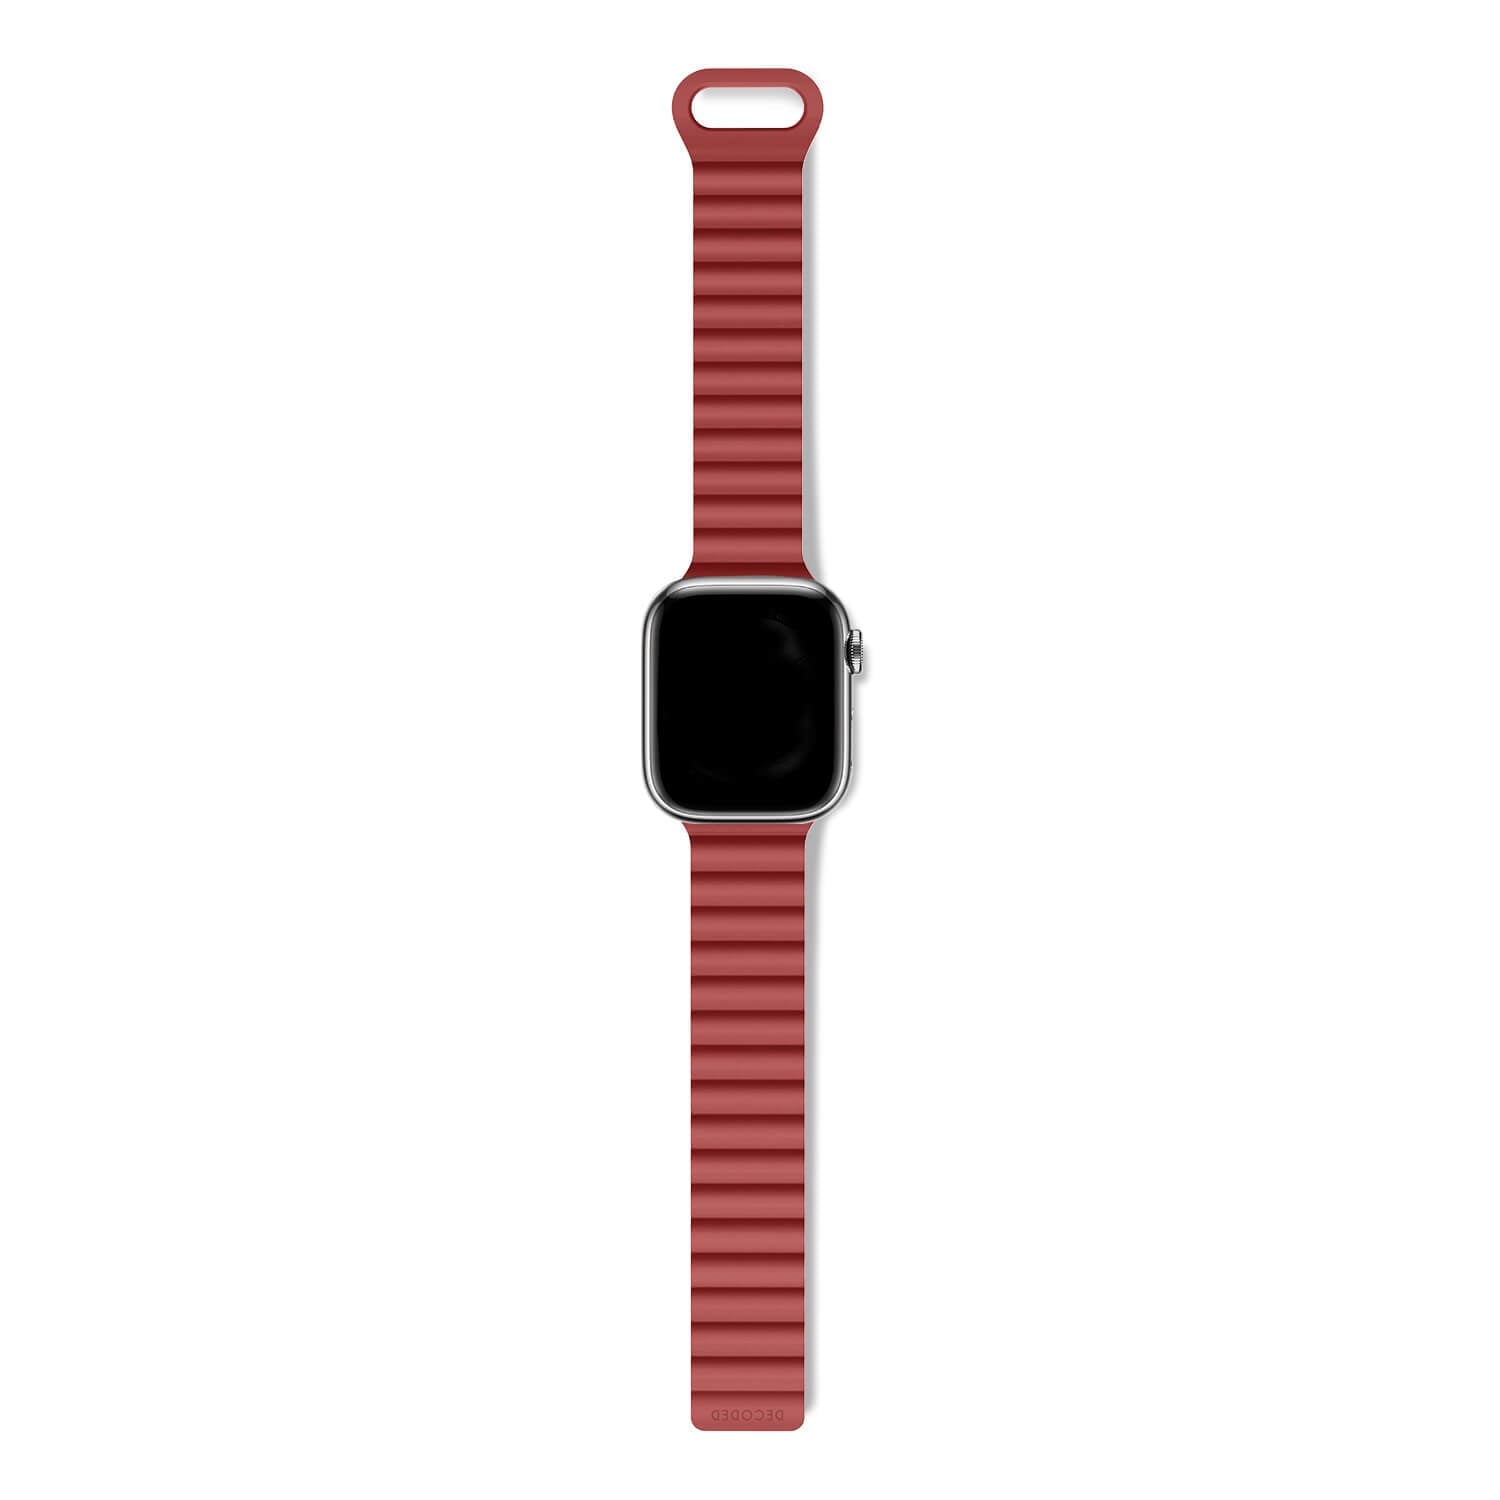 Silicone Traction Loop Strap Apple Watch 42mm Astro Dust